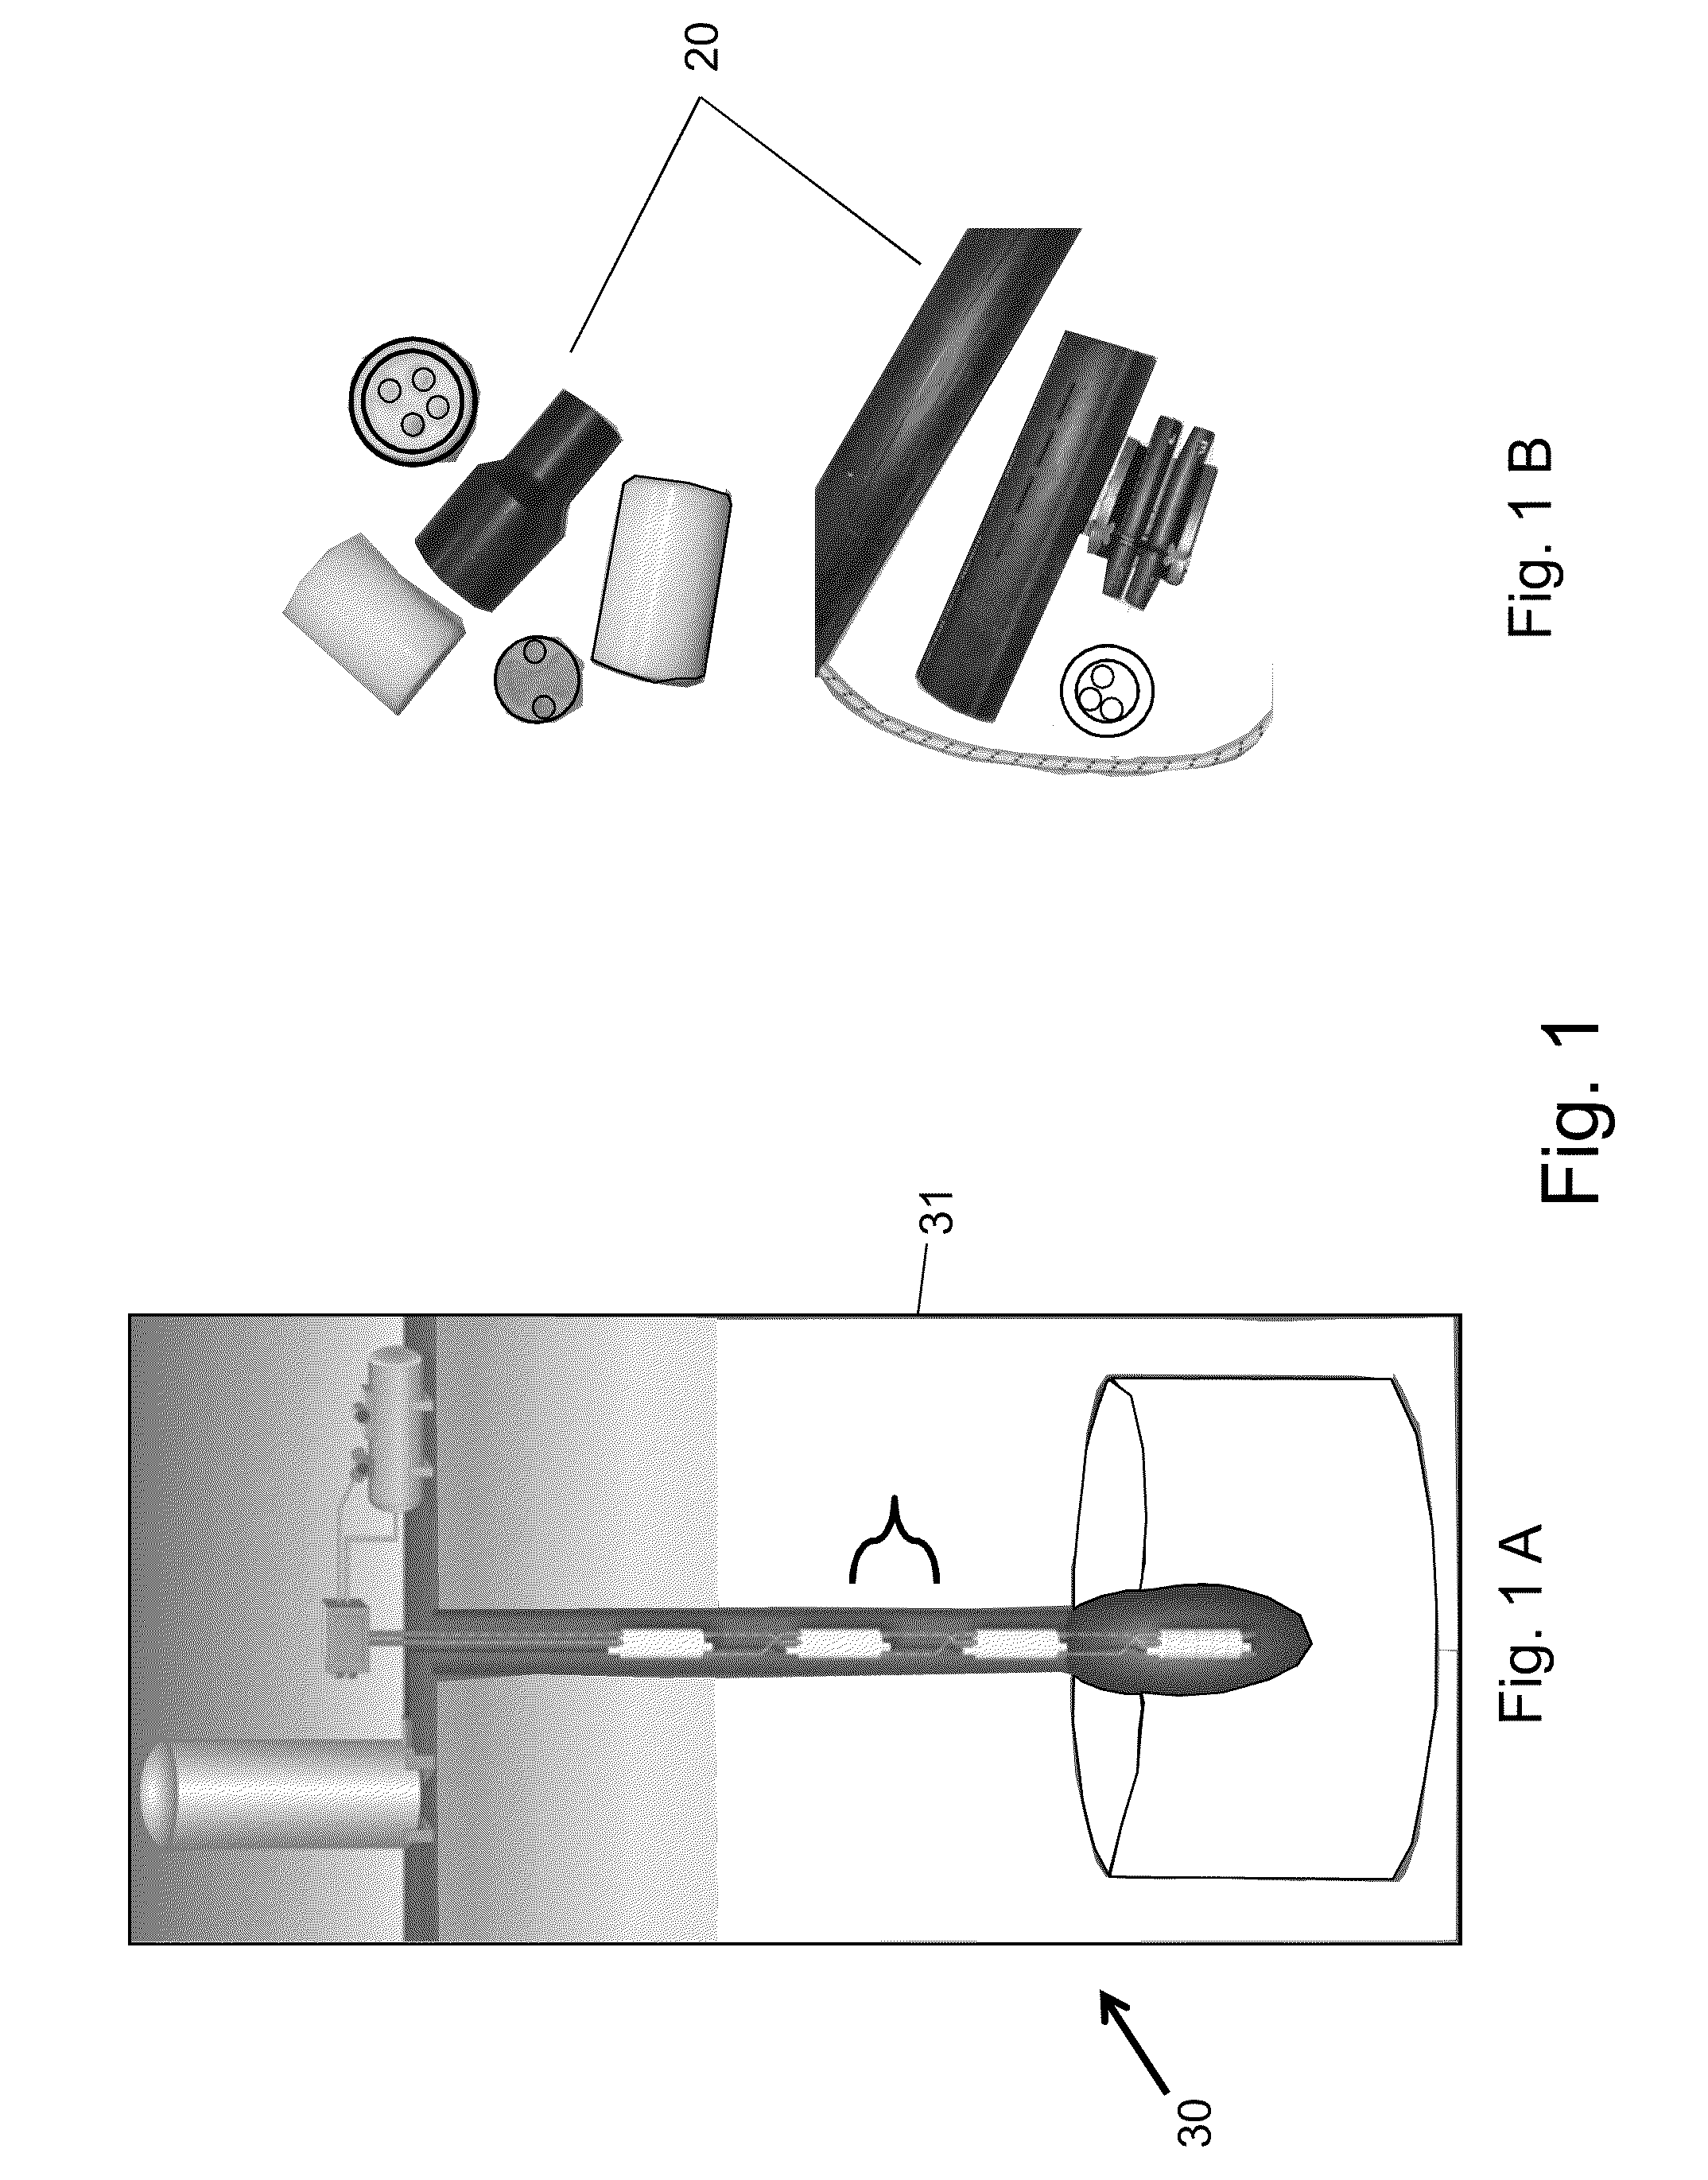 Fluid well pumping system and method to produce same